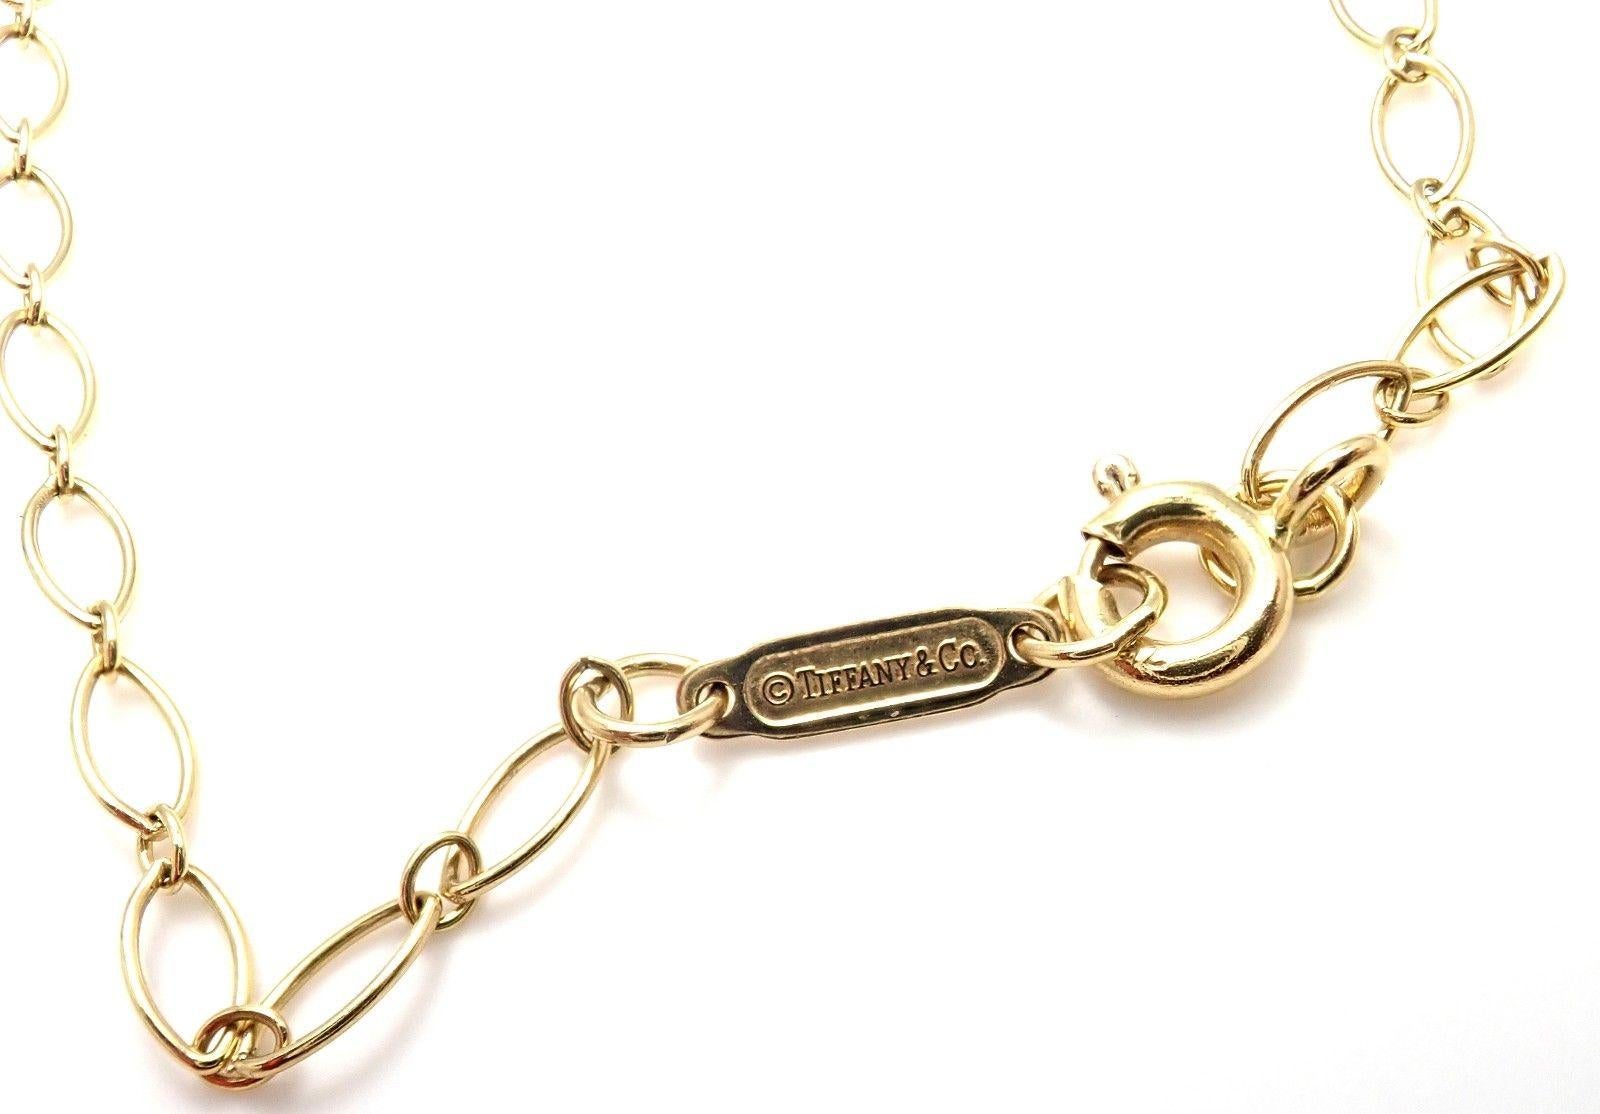 Tiffany and Co. Trefoil Key Pendant Oval Link Yellow Gold Chain ...